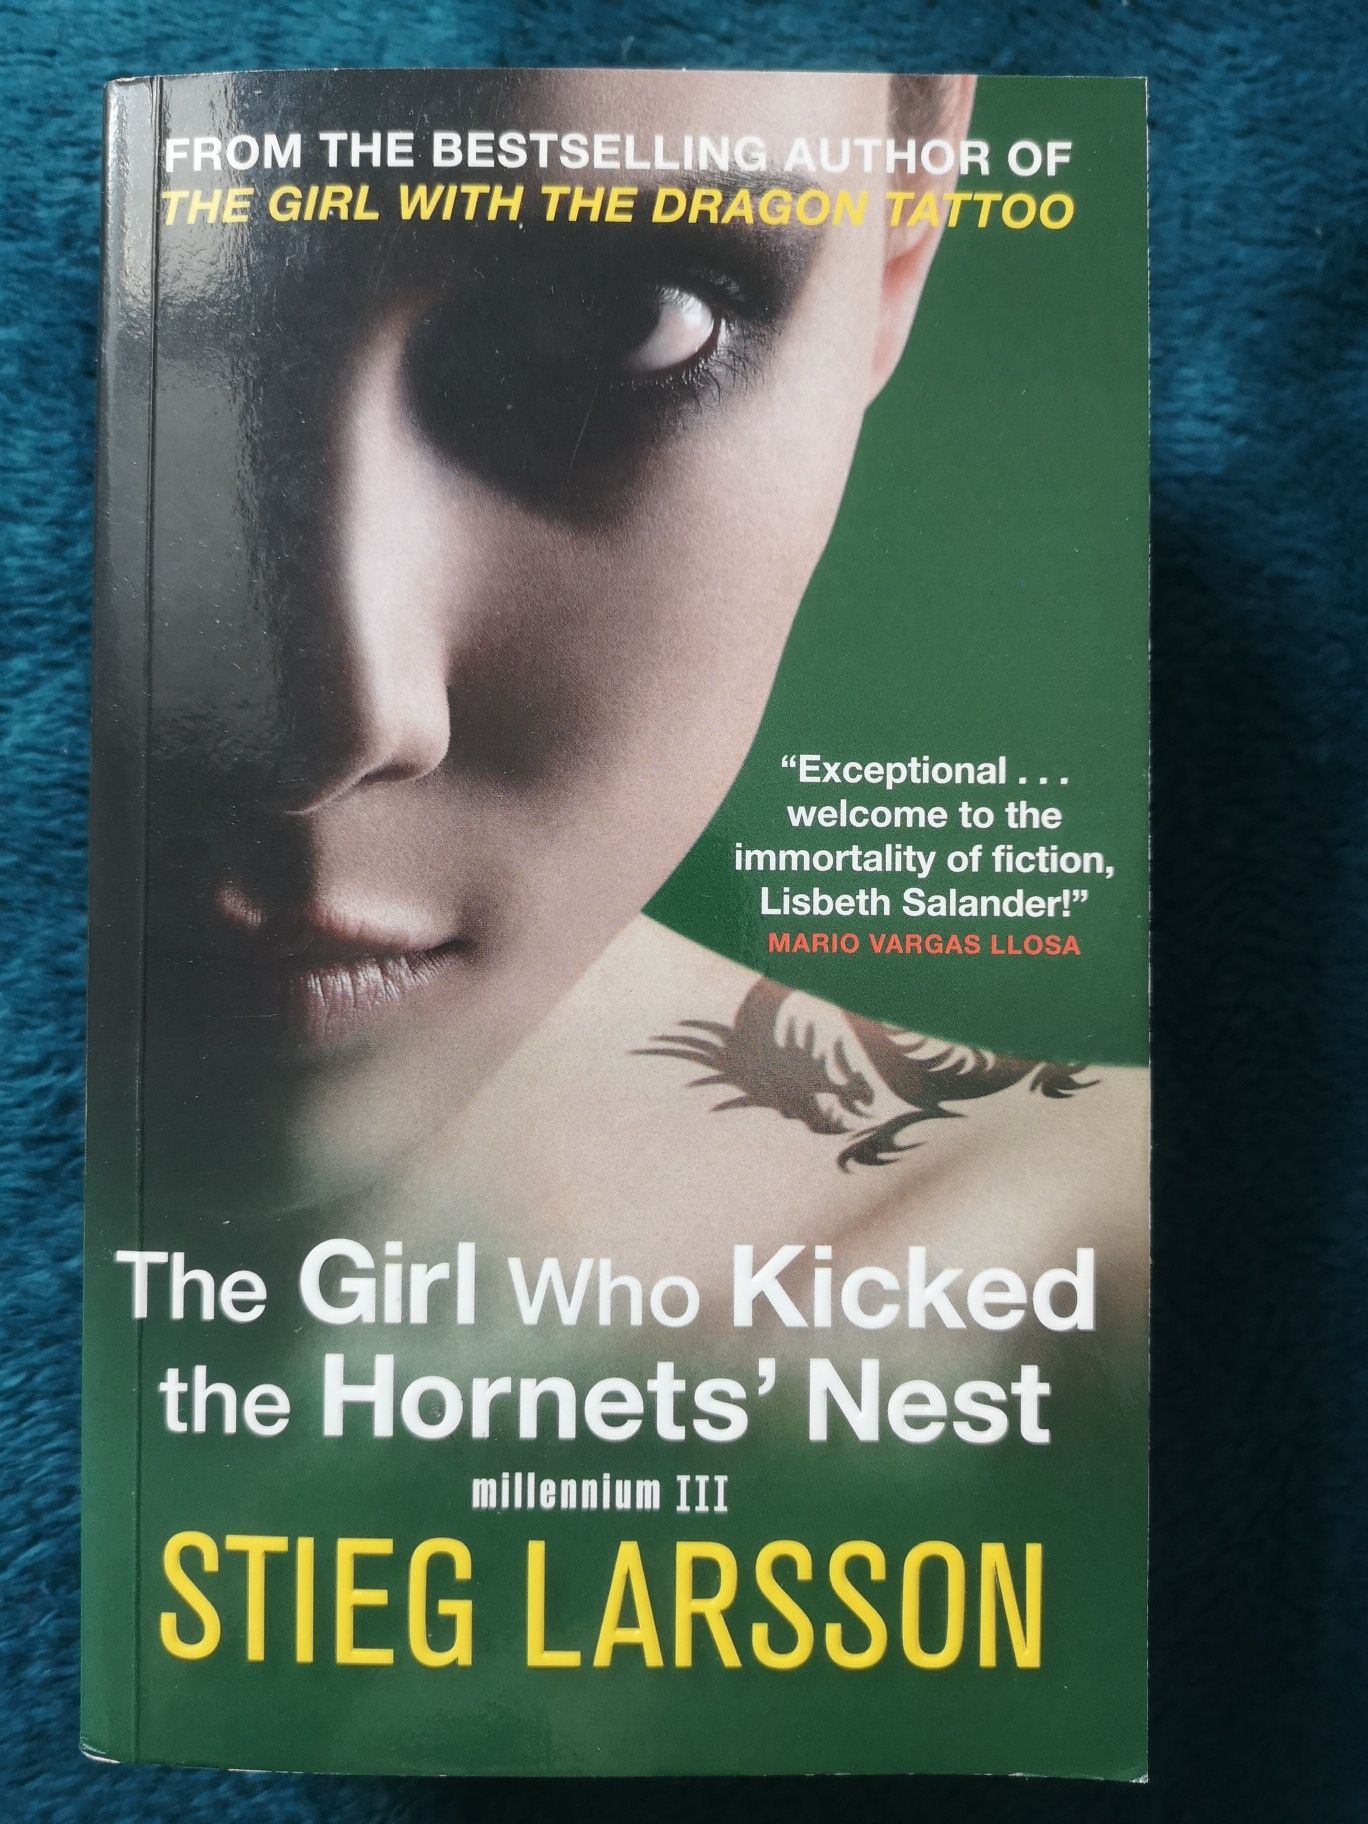 Stieg larsson - the girl who kicked the hornets' nest